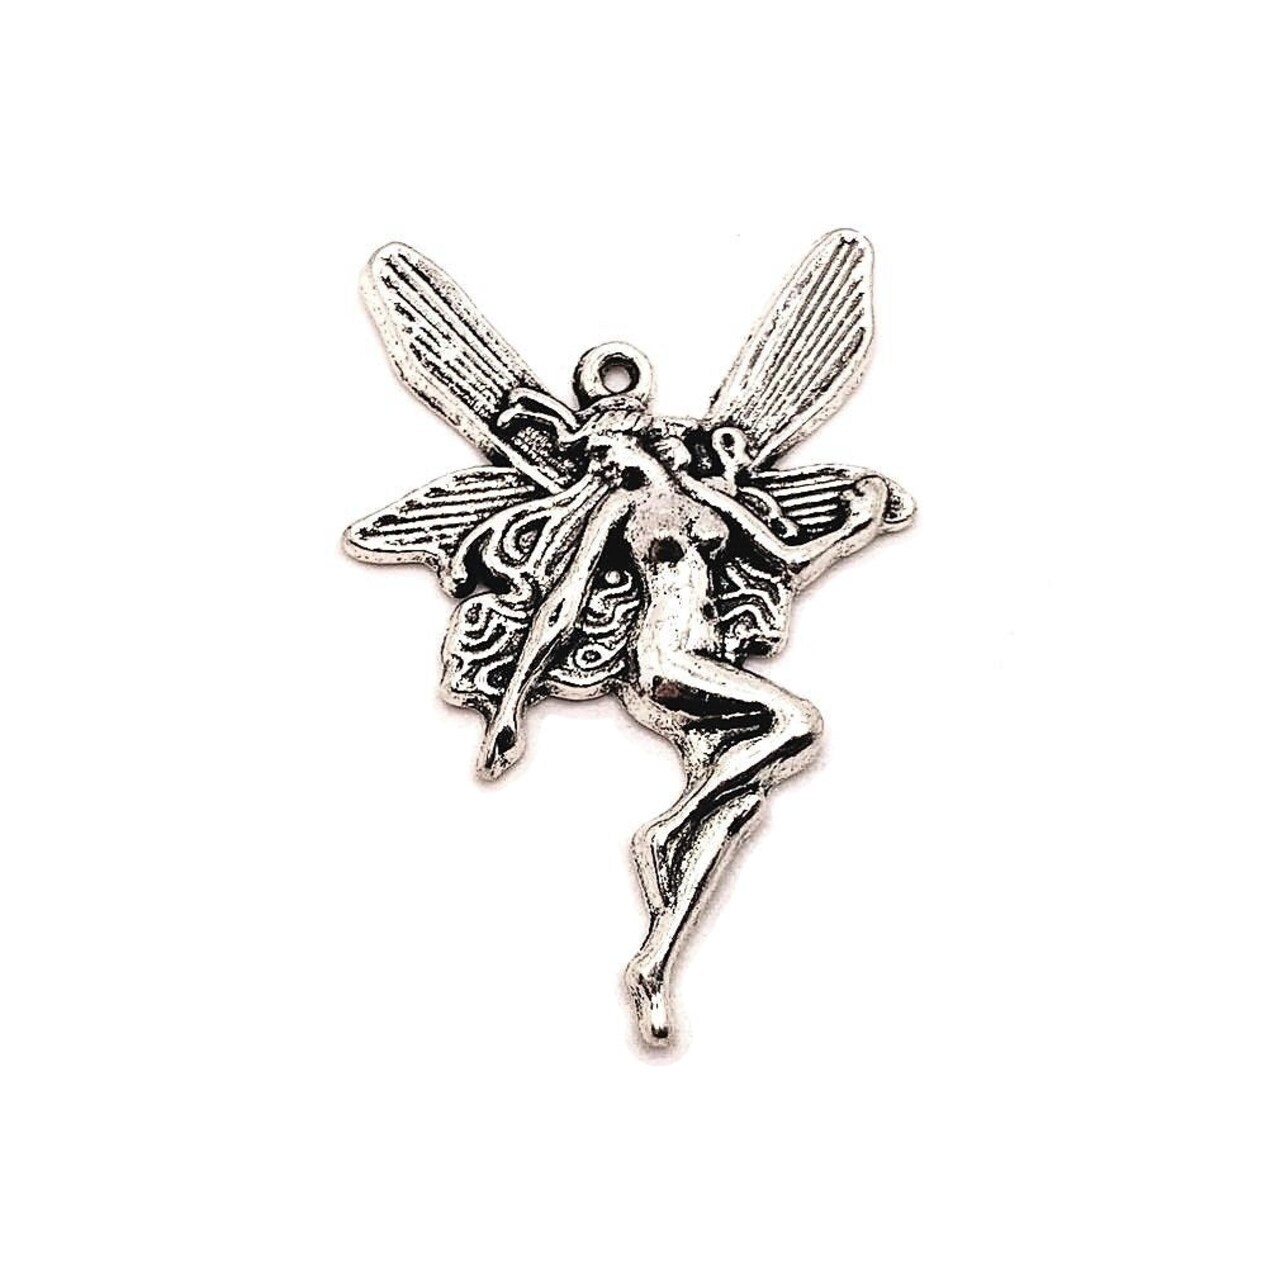 1, 4 or 20 Pieces:  Large Silver Fairy Charms, Silver Sprite Charm